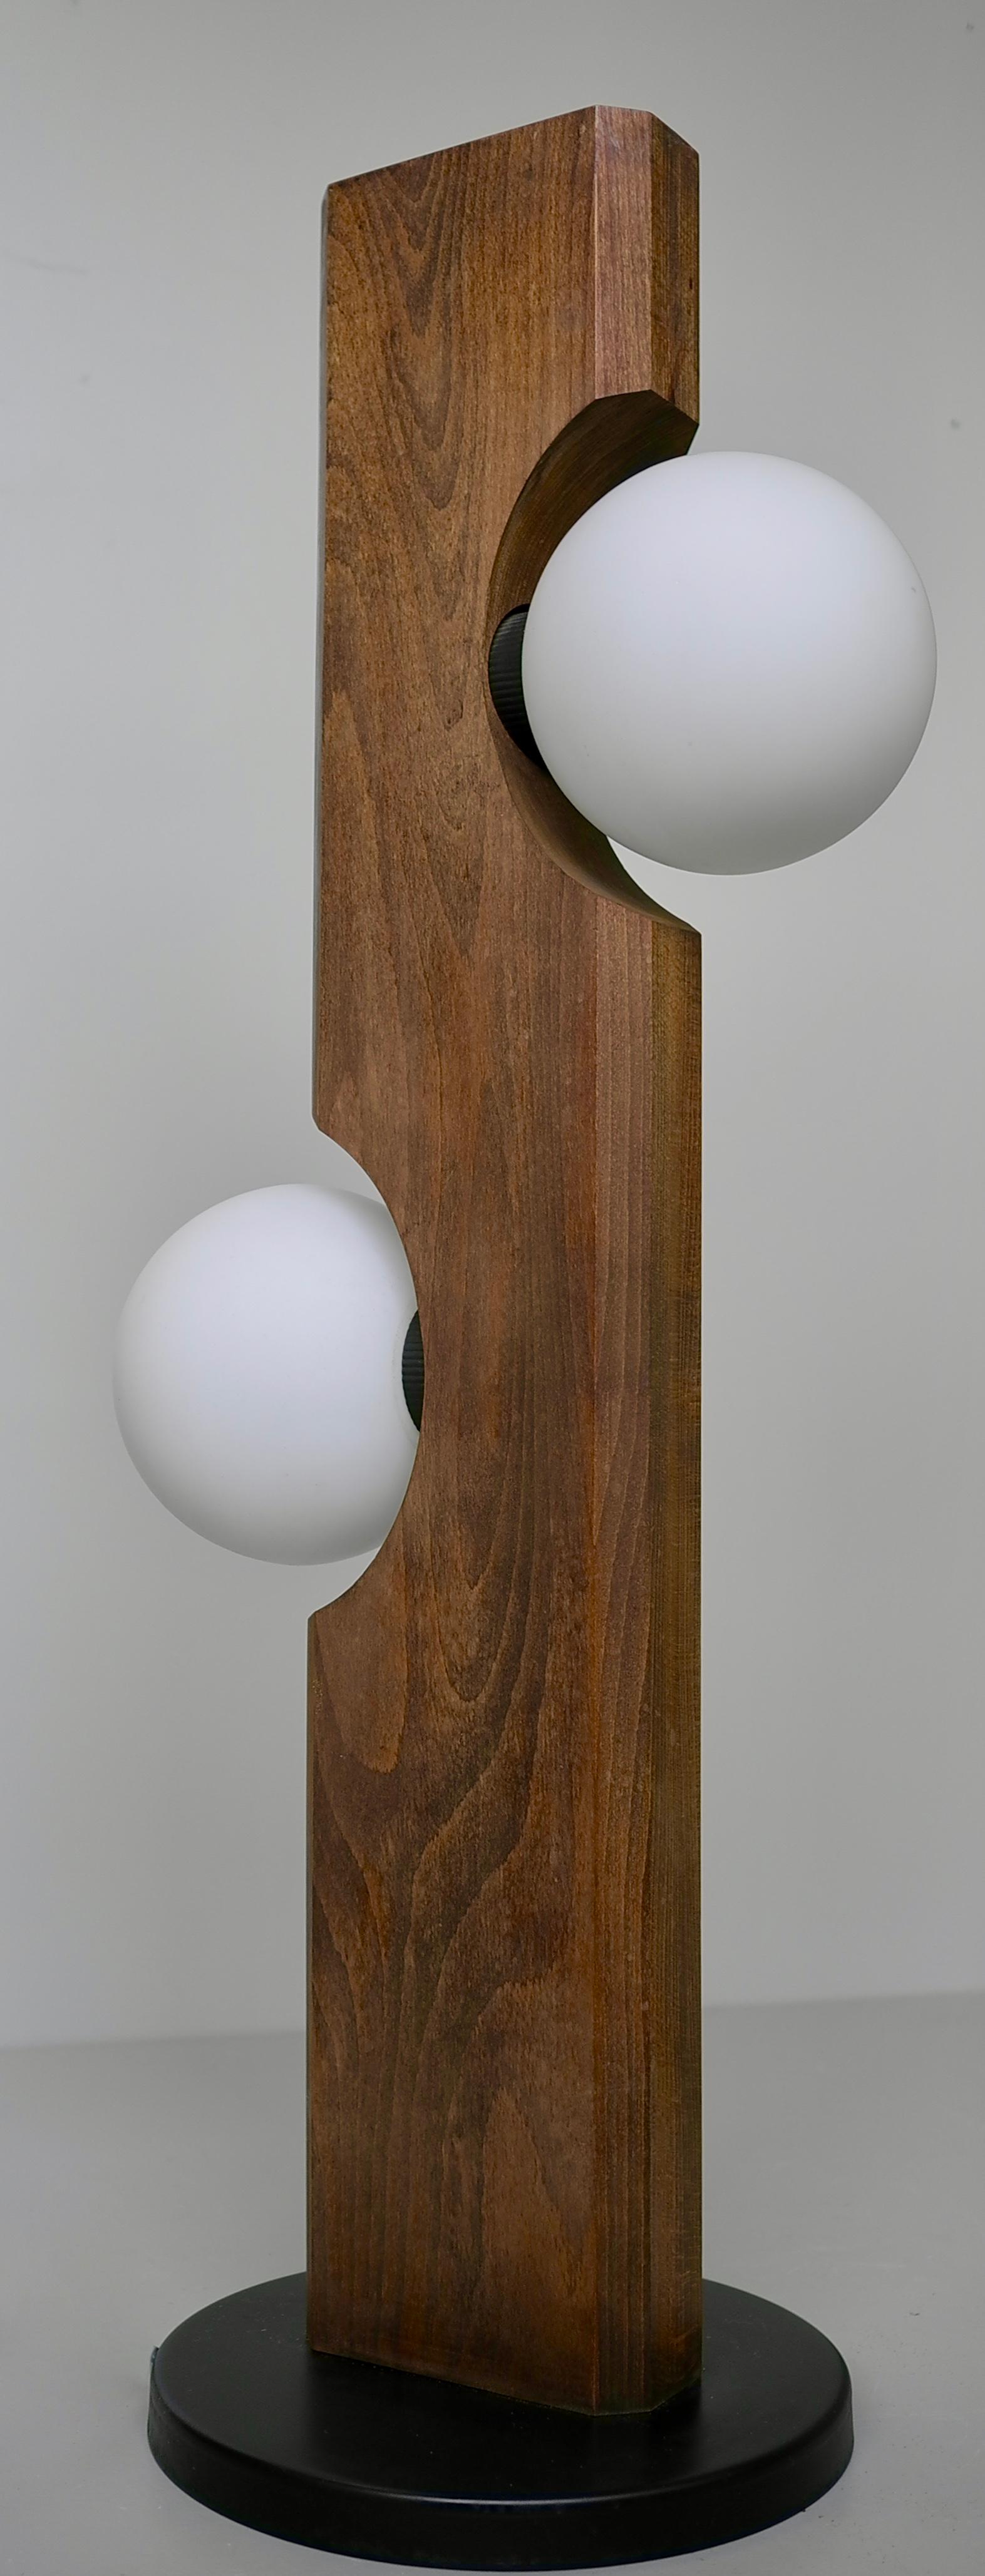 Temde Leuchten Floor or Table Lamp in Wood with White Glass Balls, Germany 1969 For Sale 6